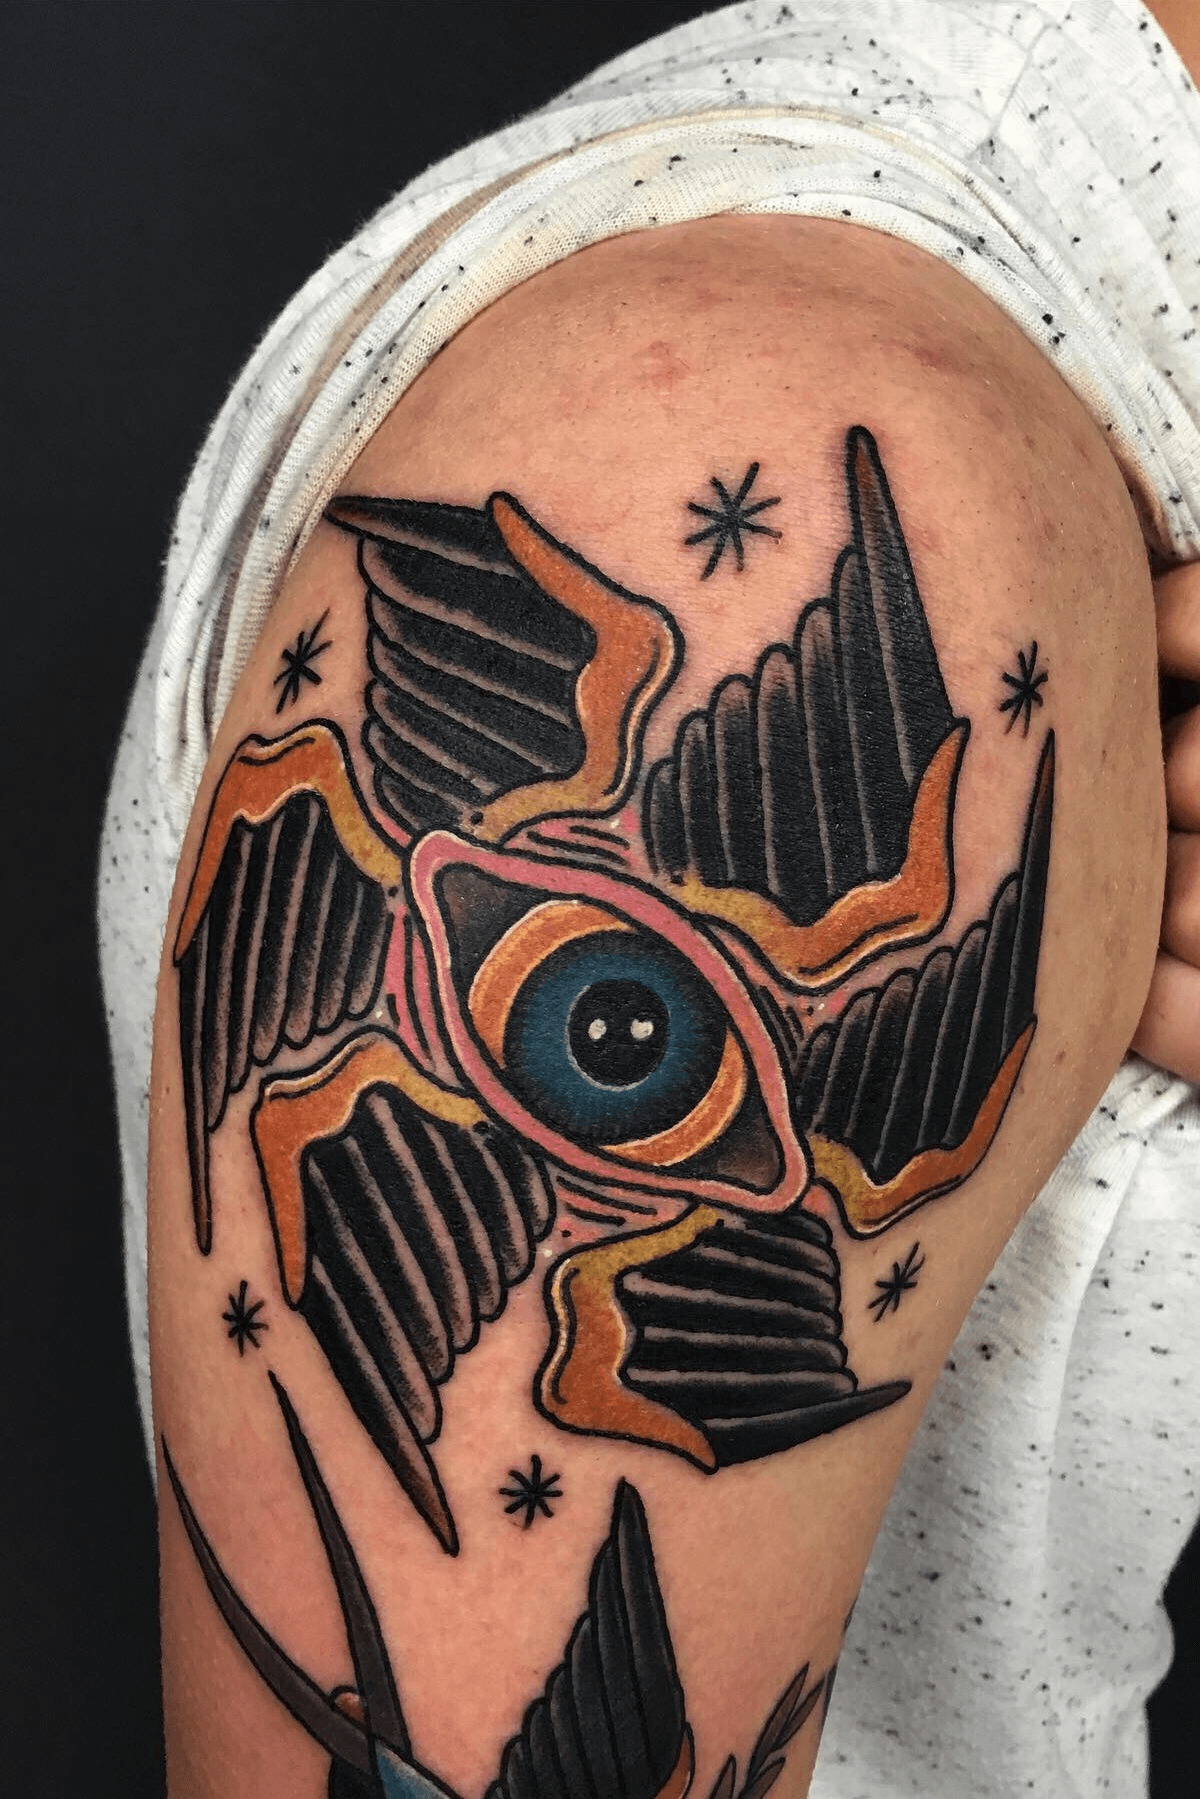 Done by Izzy at American Tradition Tattoo in Manassas VA Inspired by  Seraphim II by Dan Hillier  rtattoos